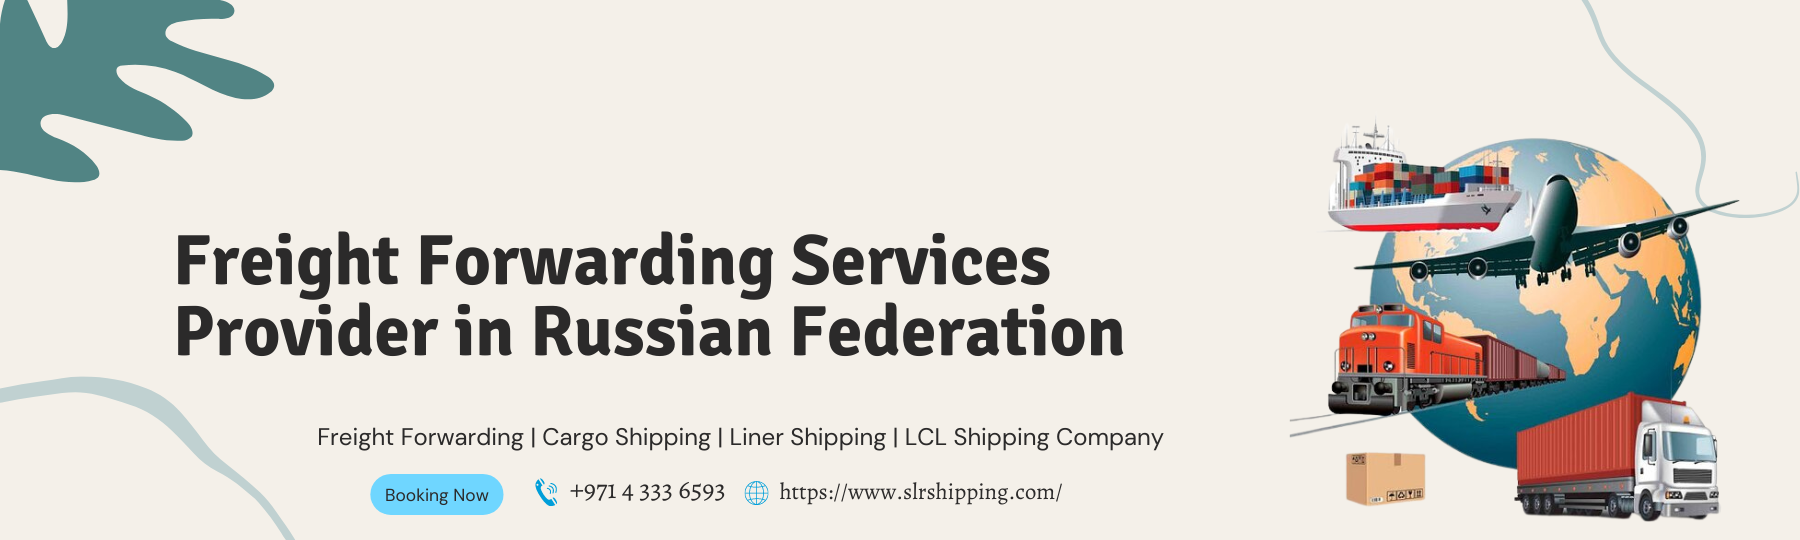 Best Logistics Services in Russia for Freight Forwarding